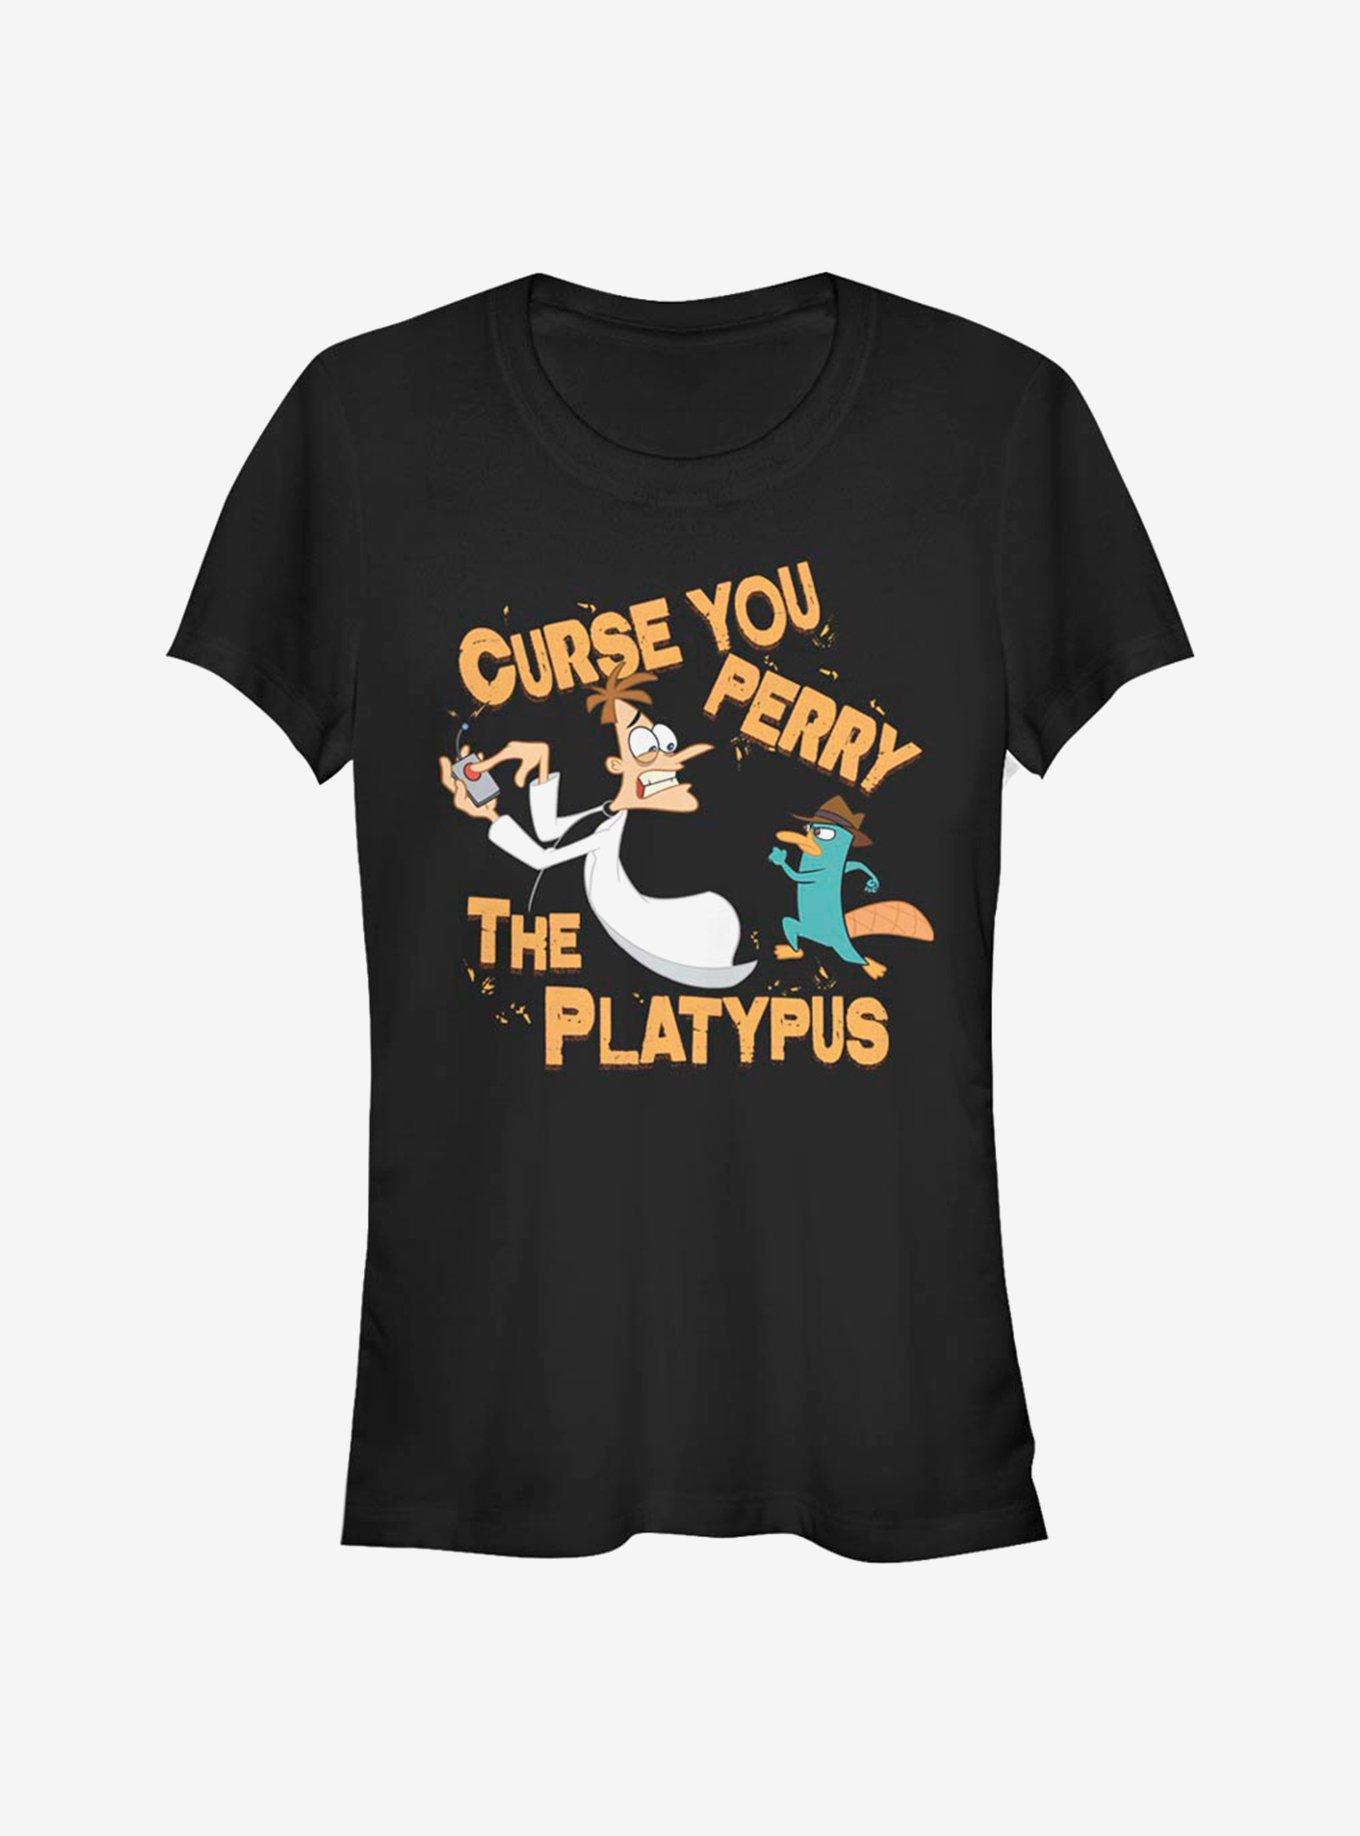 Disney Phineas And Ferb Curse You Girls T-Shirt, BLACK, hi-res